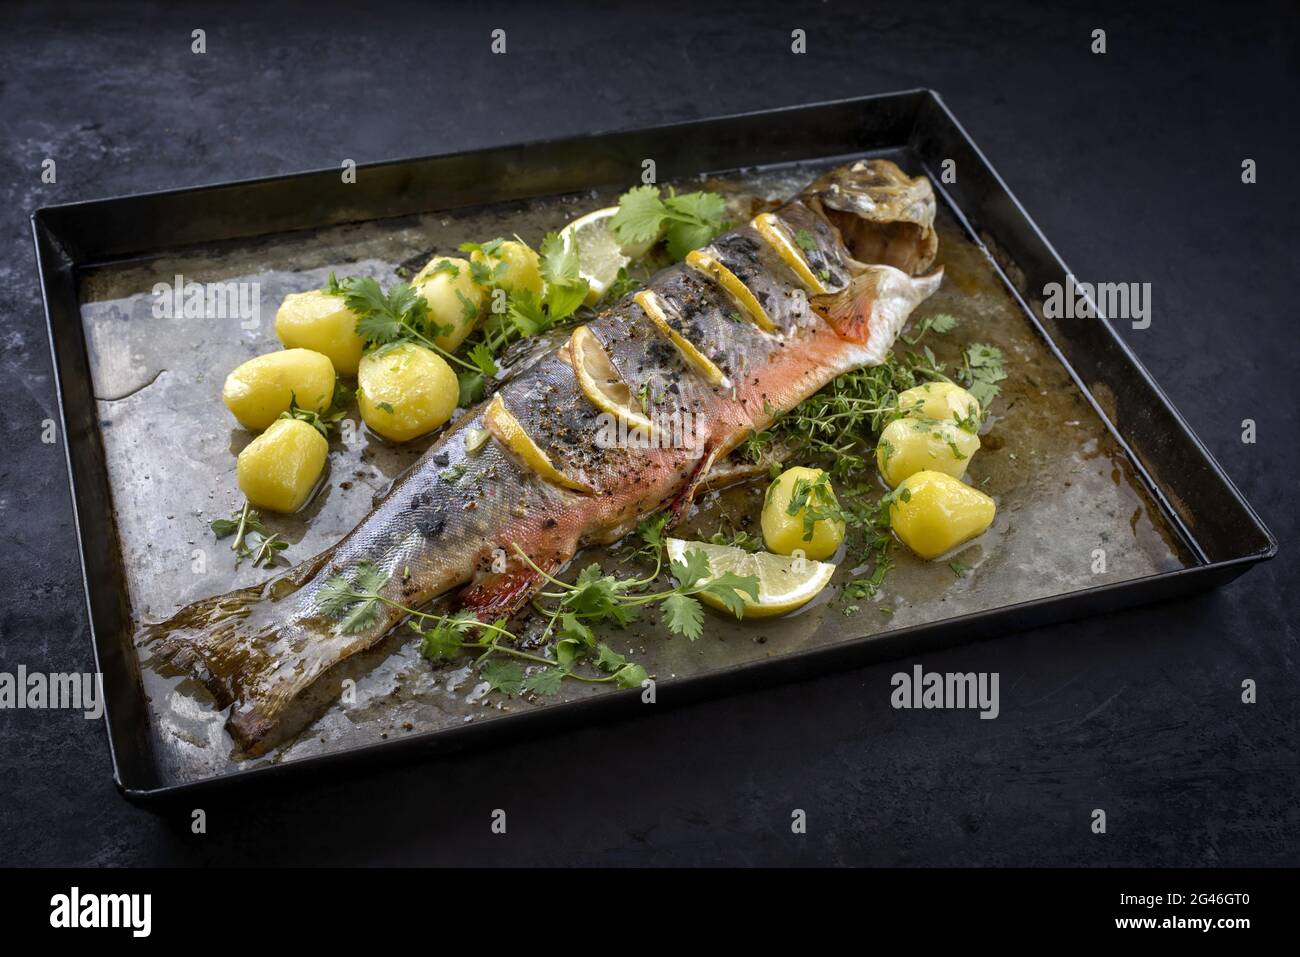 Traditional smoked and roasted char with boiled potatoes and lemon slices offered as close-up on a rustic metal tray Stock Photo